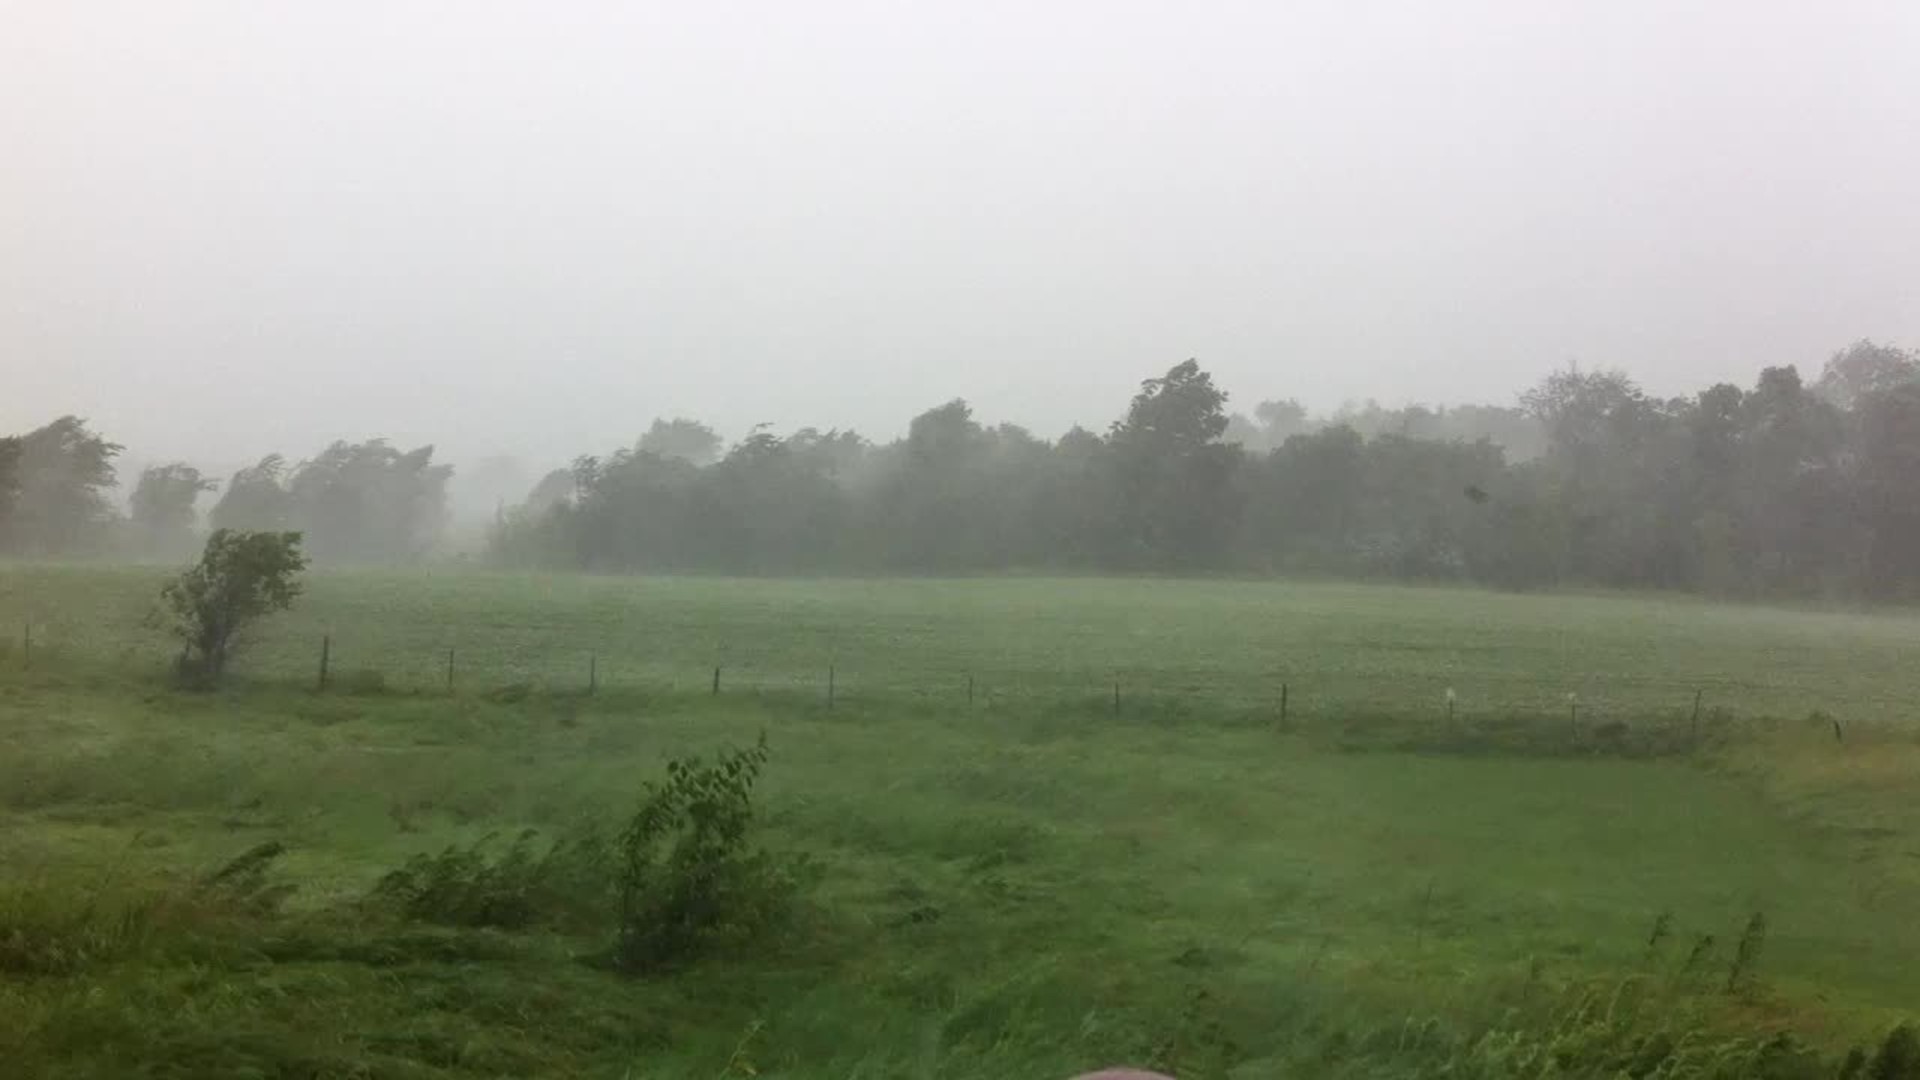 Heavy rain and wind with 6-24-13 storms video from Lori Barkley via WQAD iPhone app